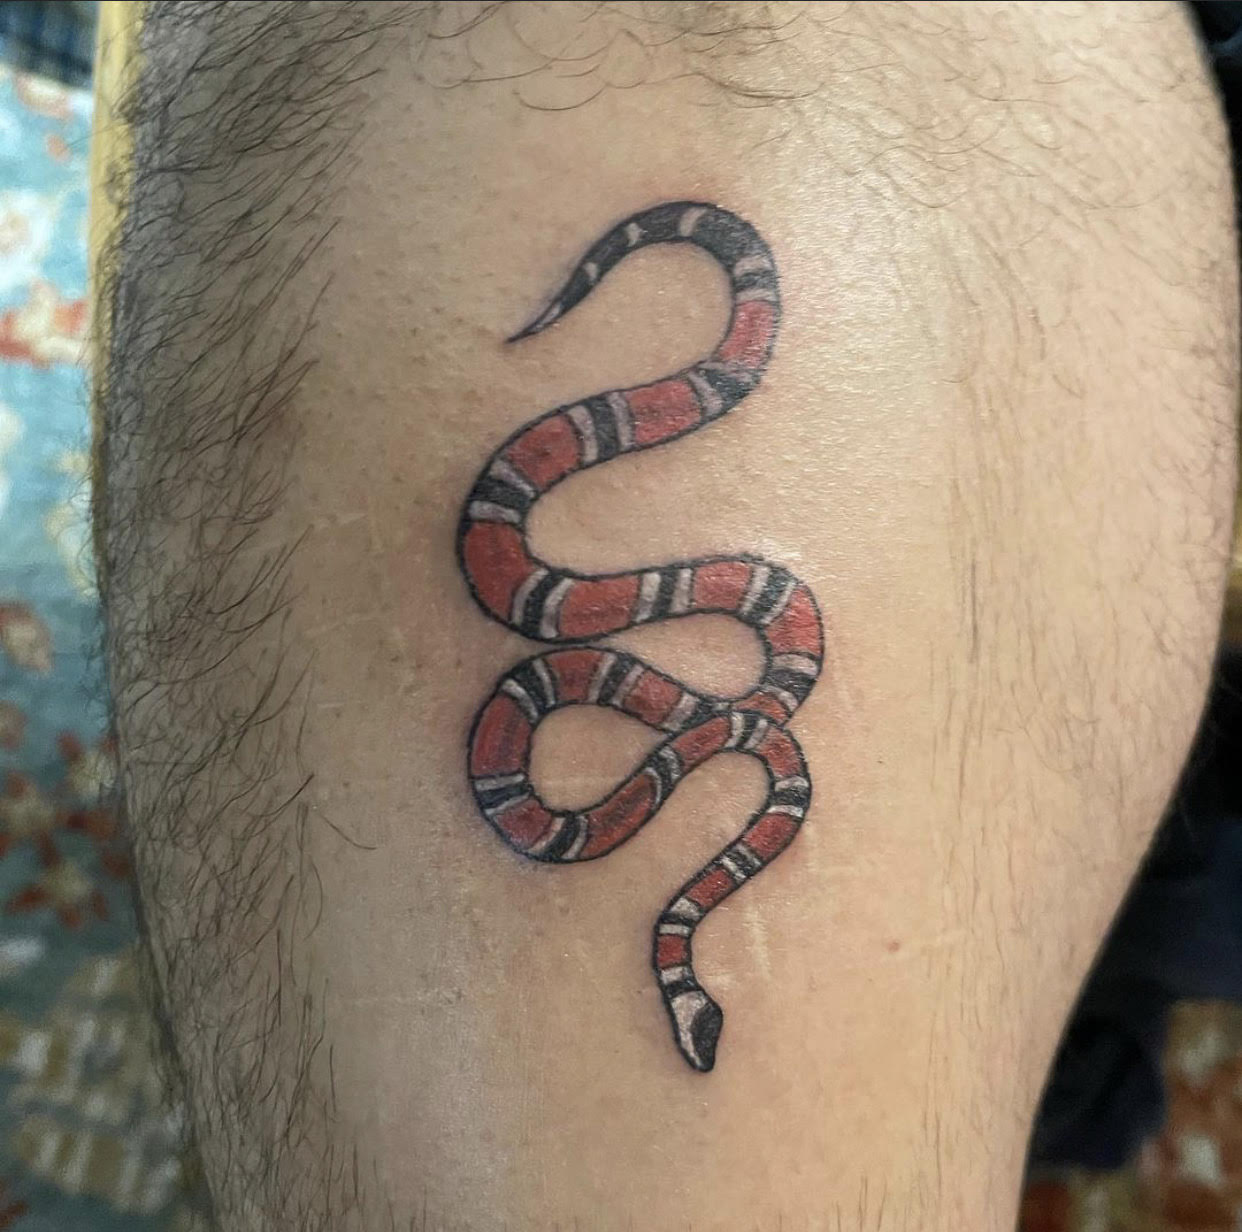 a tattoo of a snake